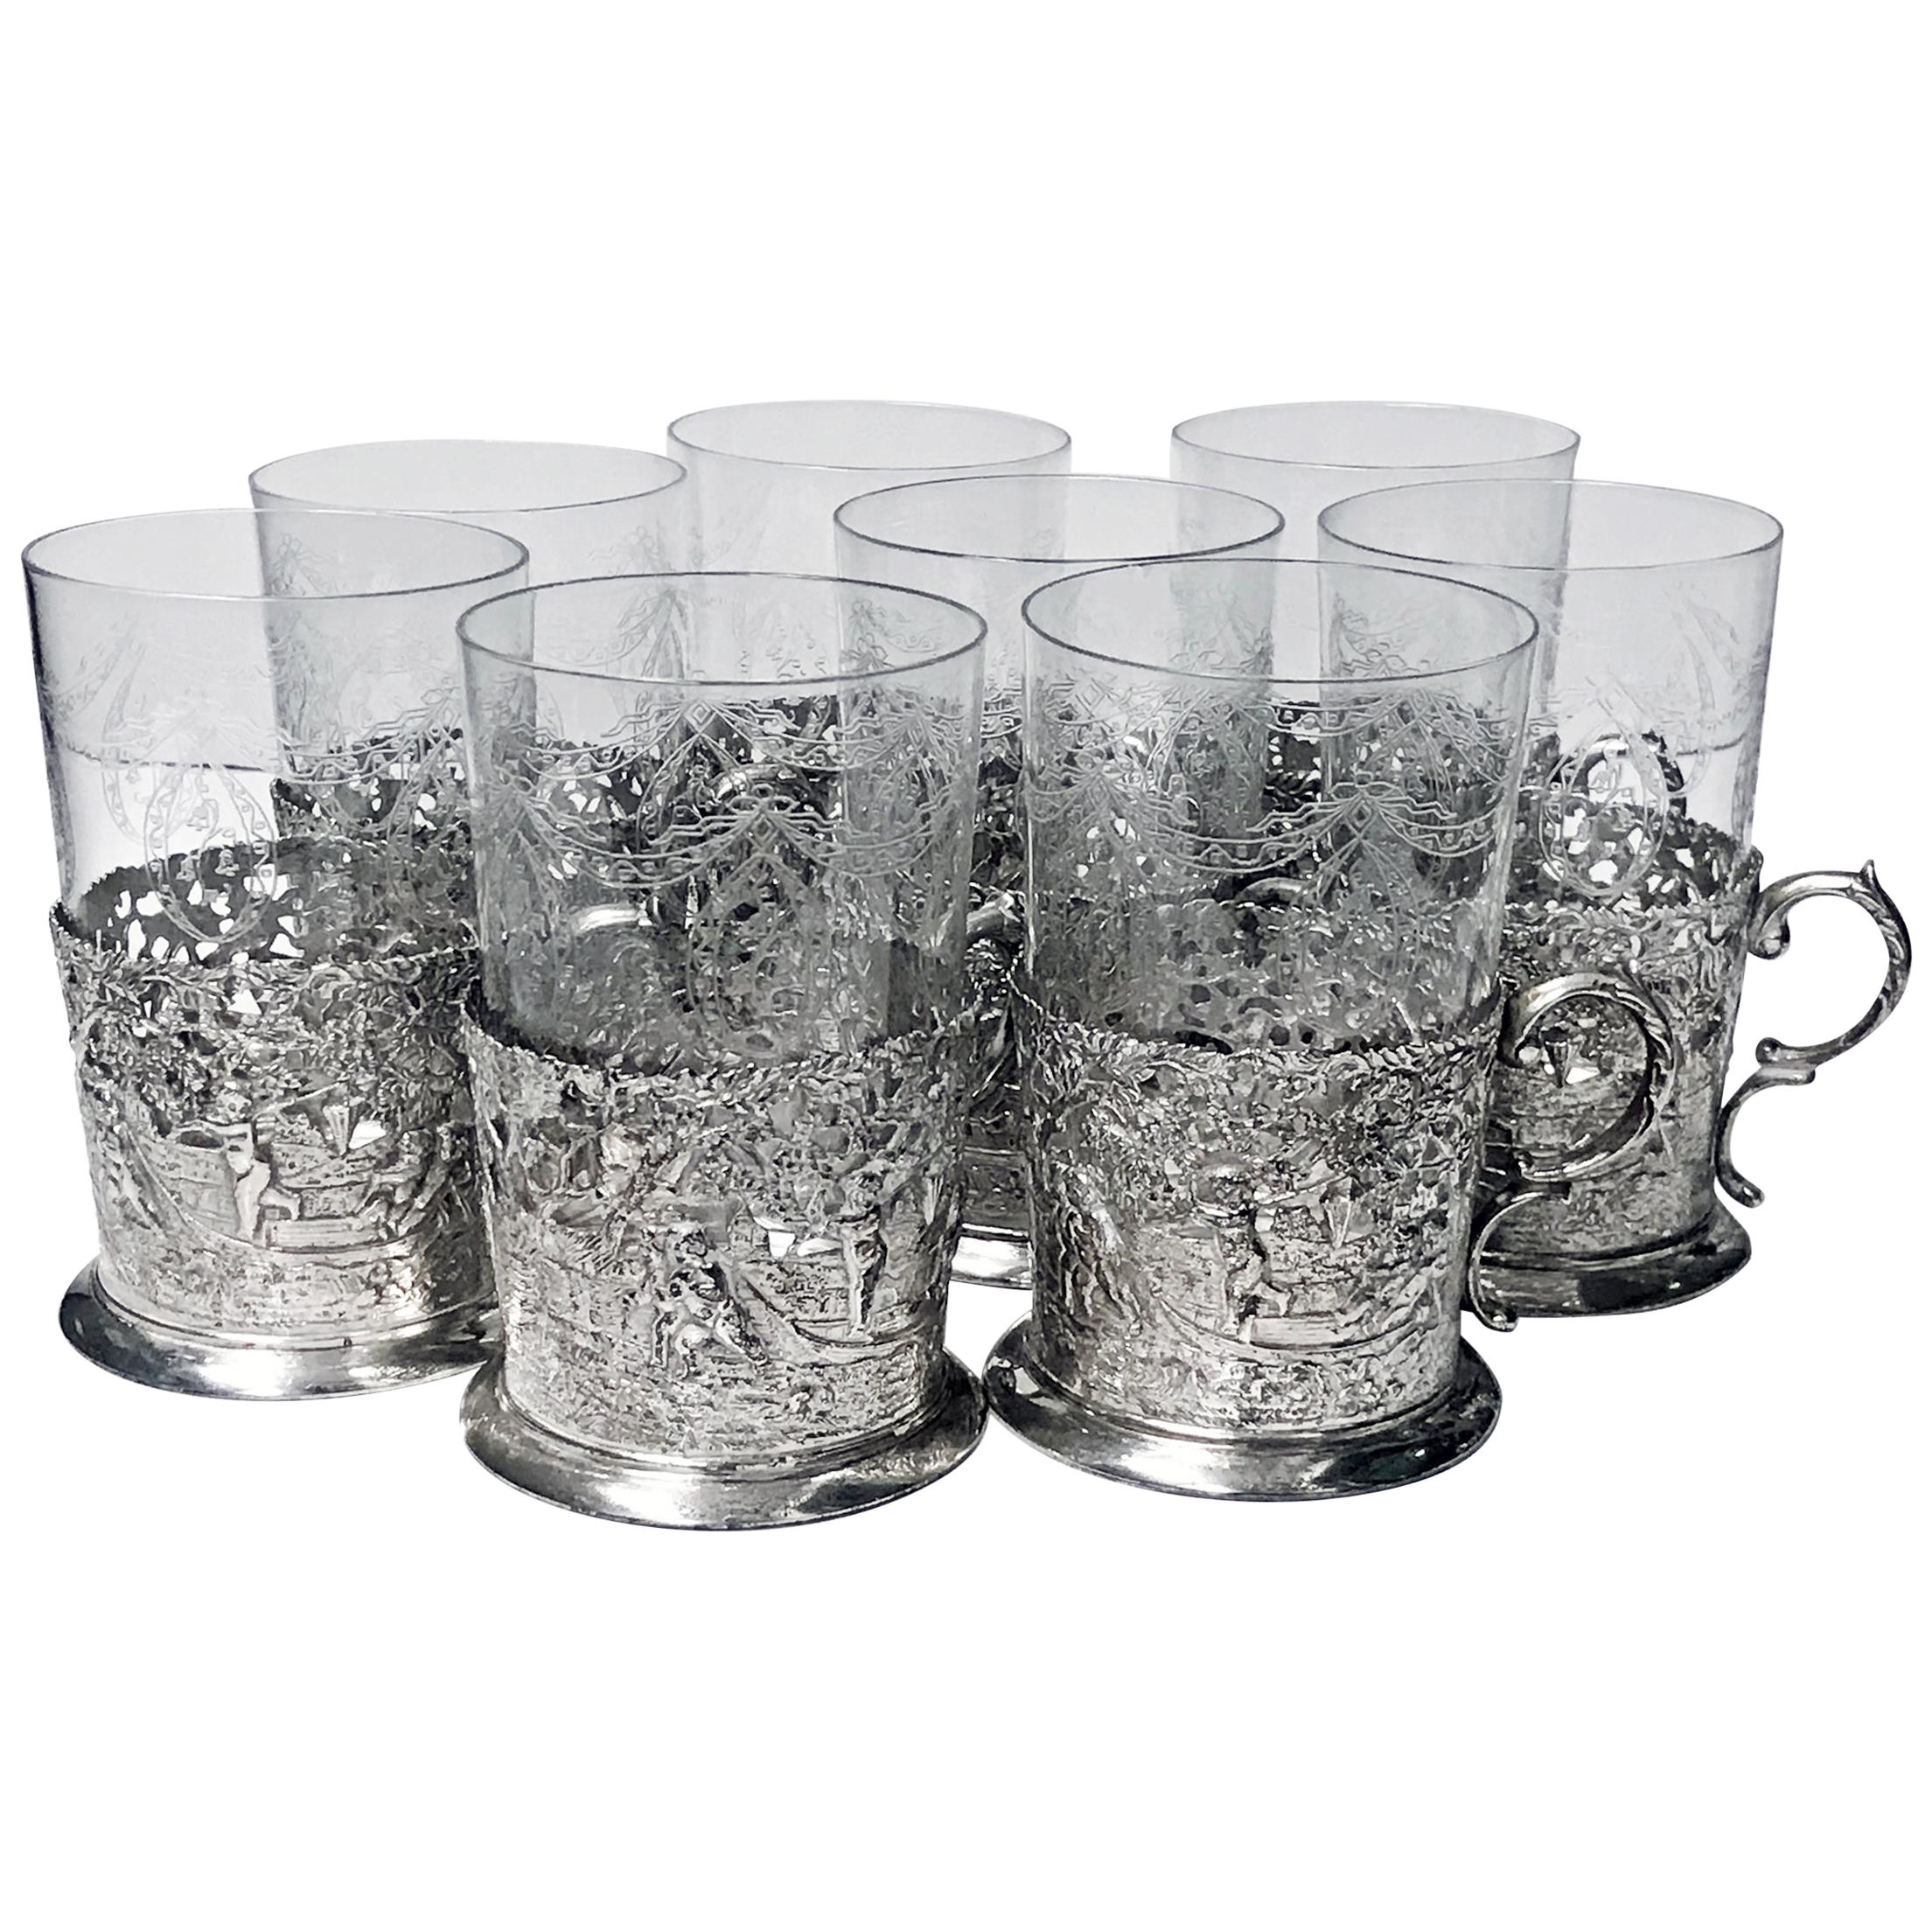 Set of 8 Silver Tea Holders with engraved glasses, Germany, circa 1900